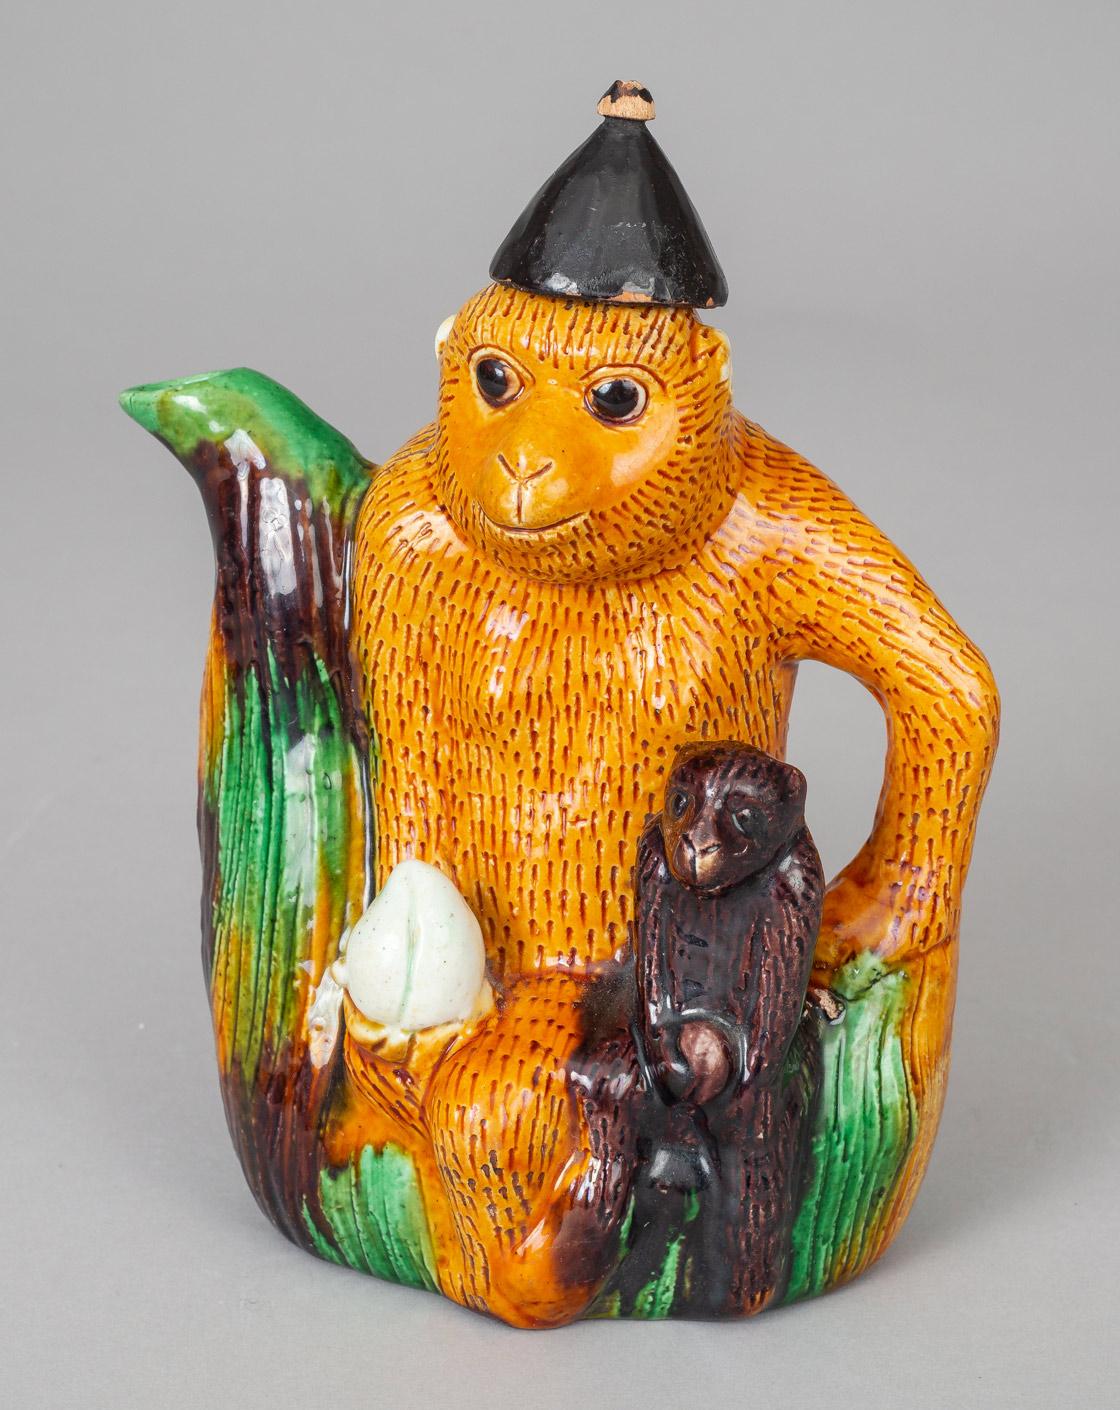 Chinese Qing dynasty Guangxu period porcelain tea pot in the form of a monkey holding a peach with a young monkey sitting on its lap also holding a peach, decorated in sancai colors of yellow, green and brown. The arm forms the handle and the